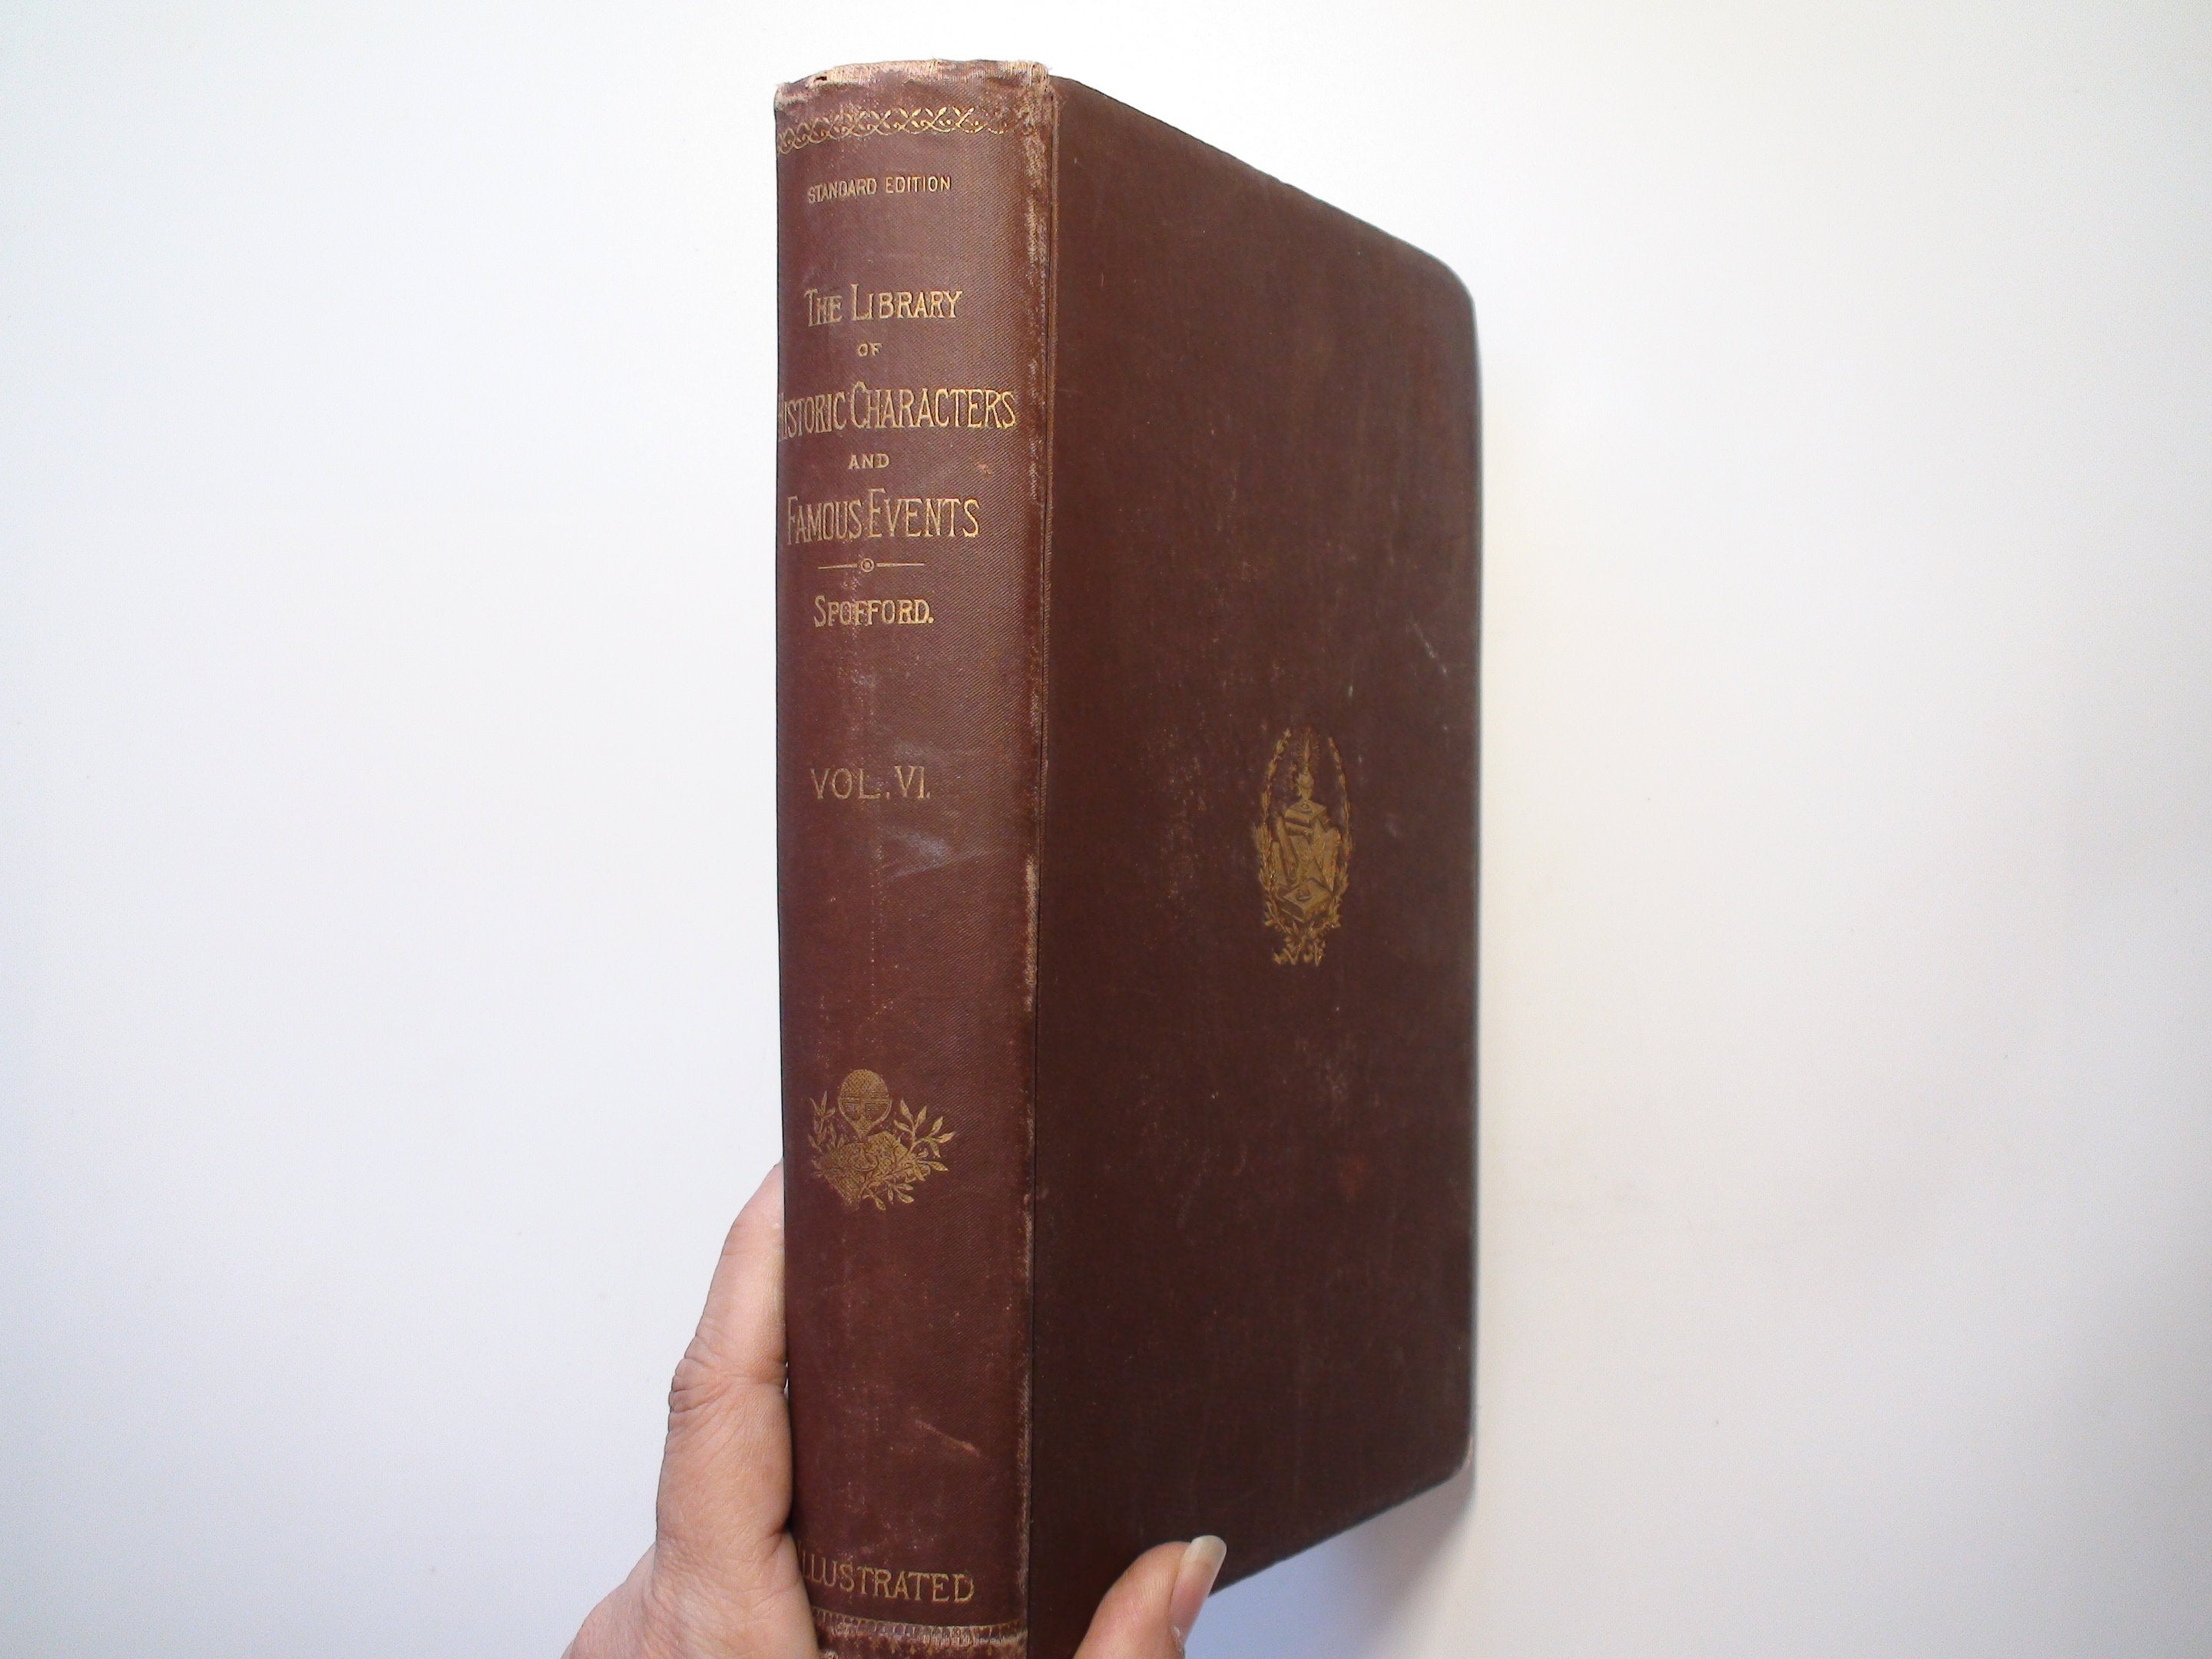 The Library of Historic Characters and Famous Events, Illustrated, Vol VI, 1895